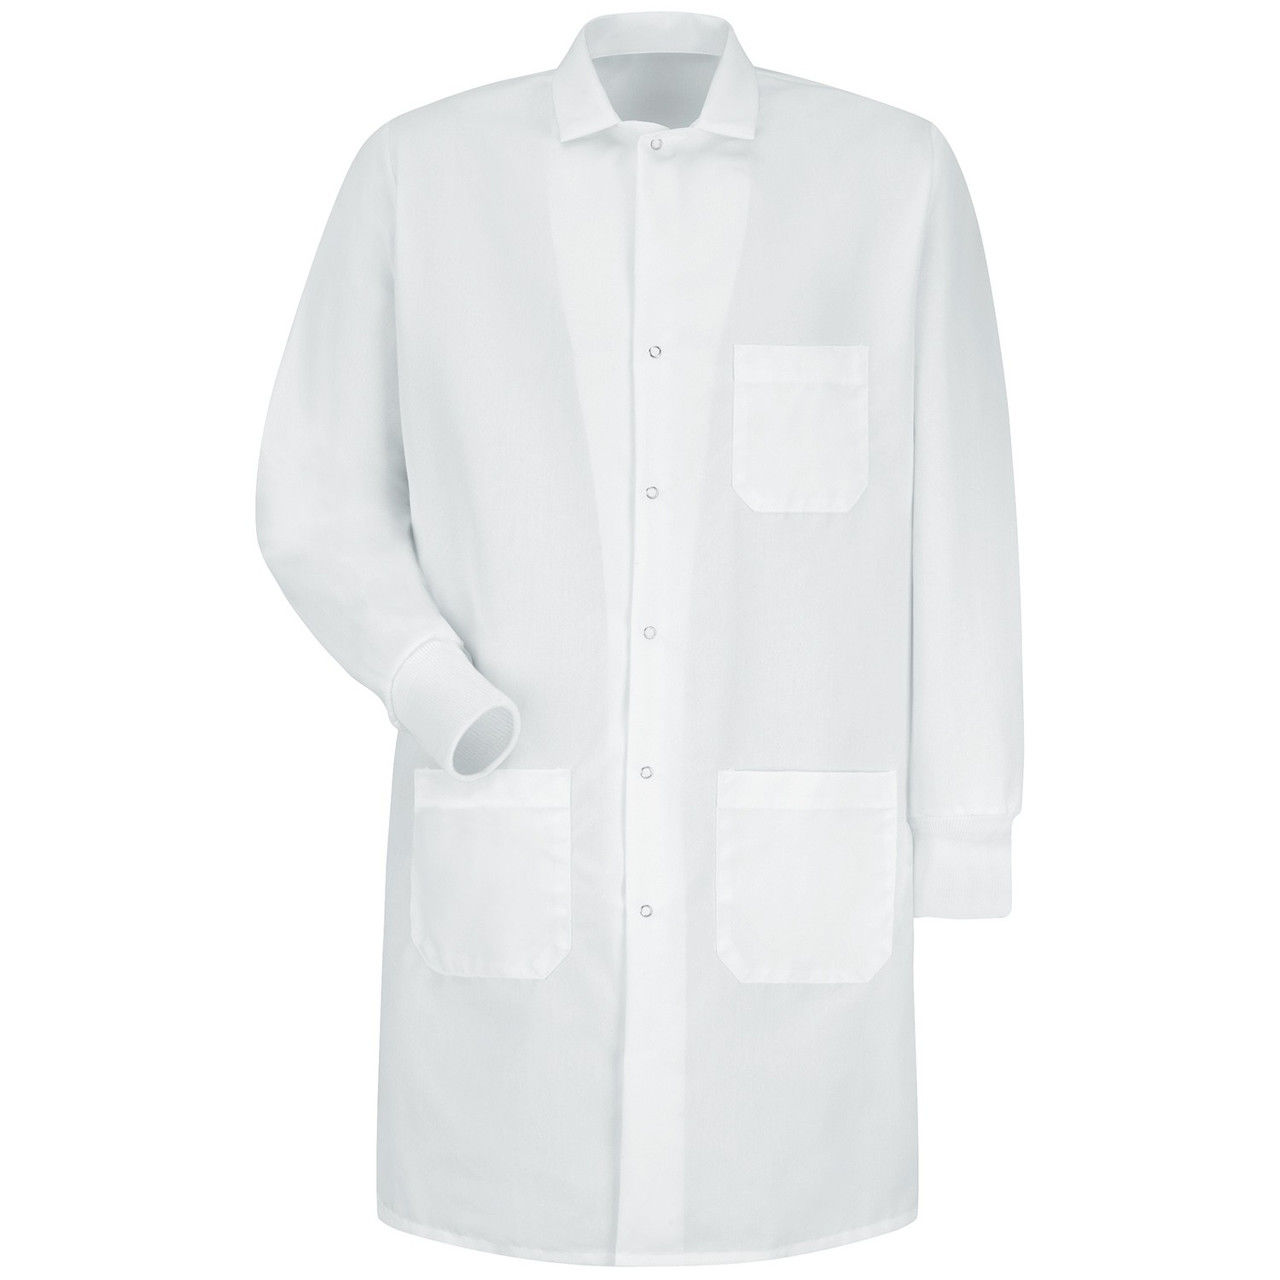 Does the red kap lab coat come with any buttons?